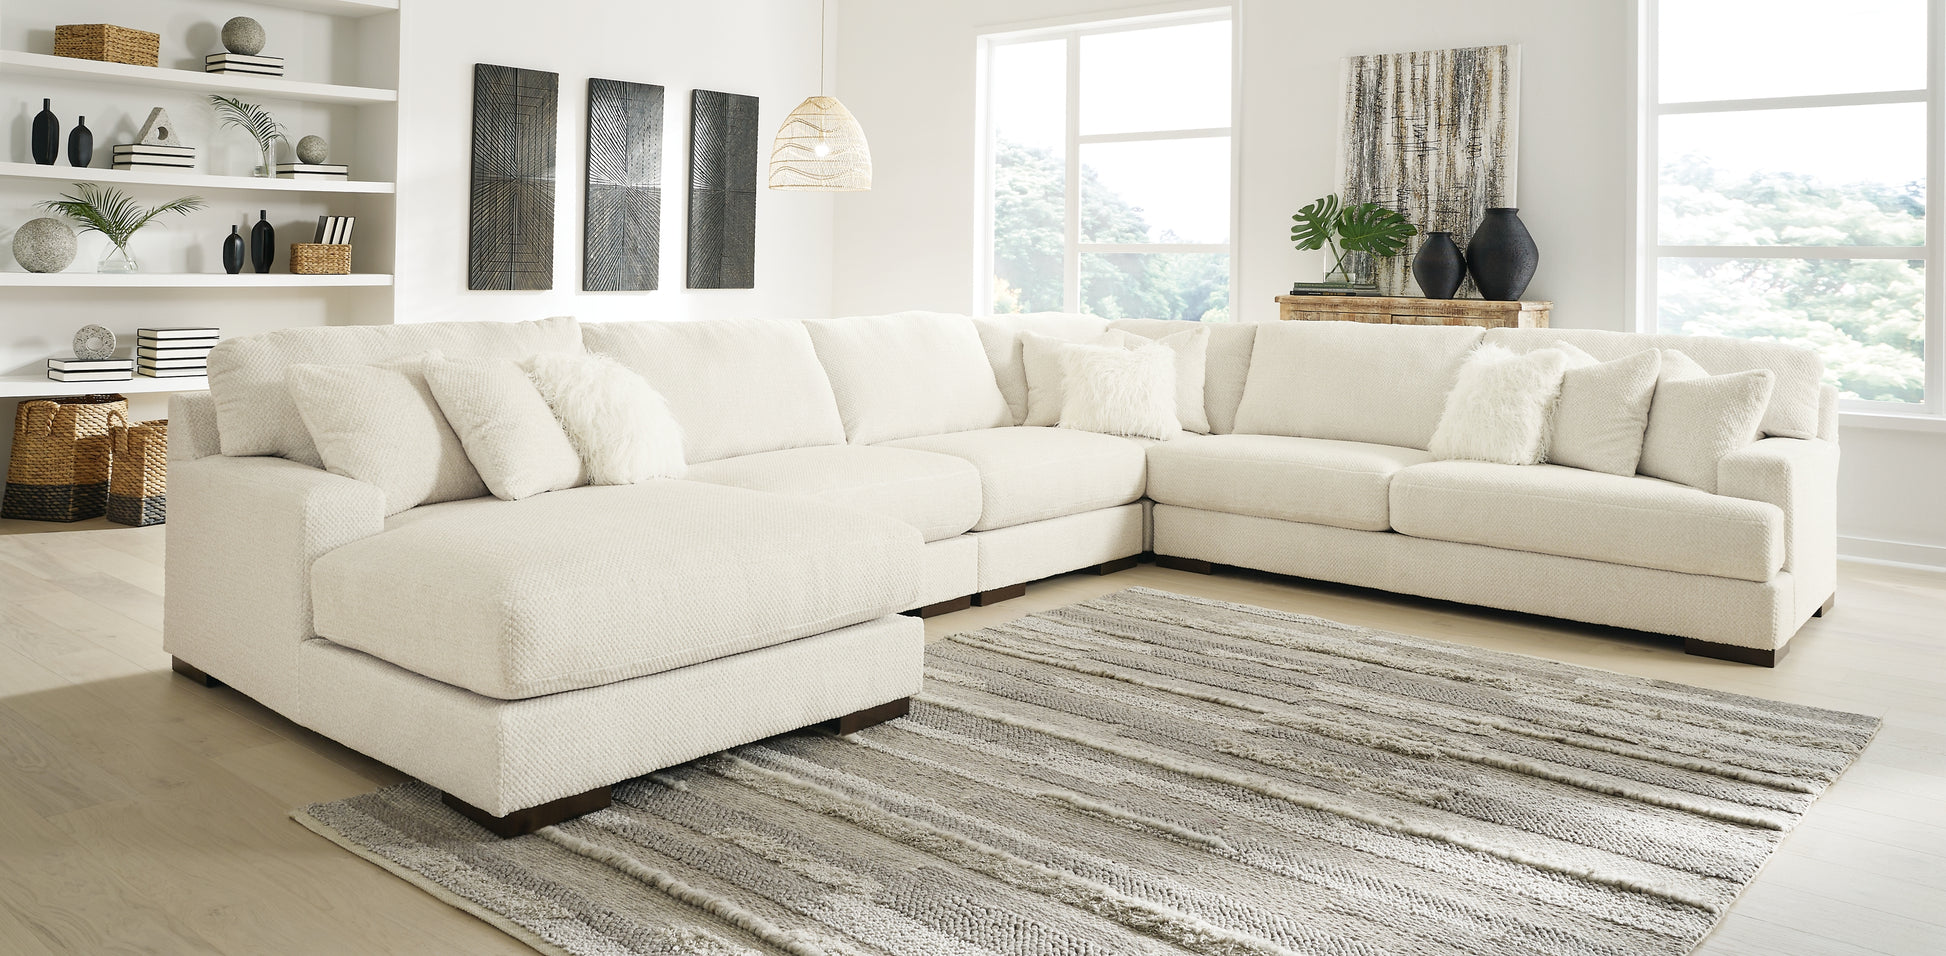 Zada 5-Piece Sectional with Chaise JB's Furniture Furniture, Bedroom, Accessories